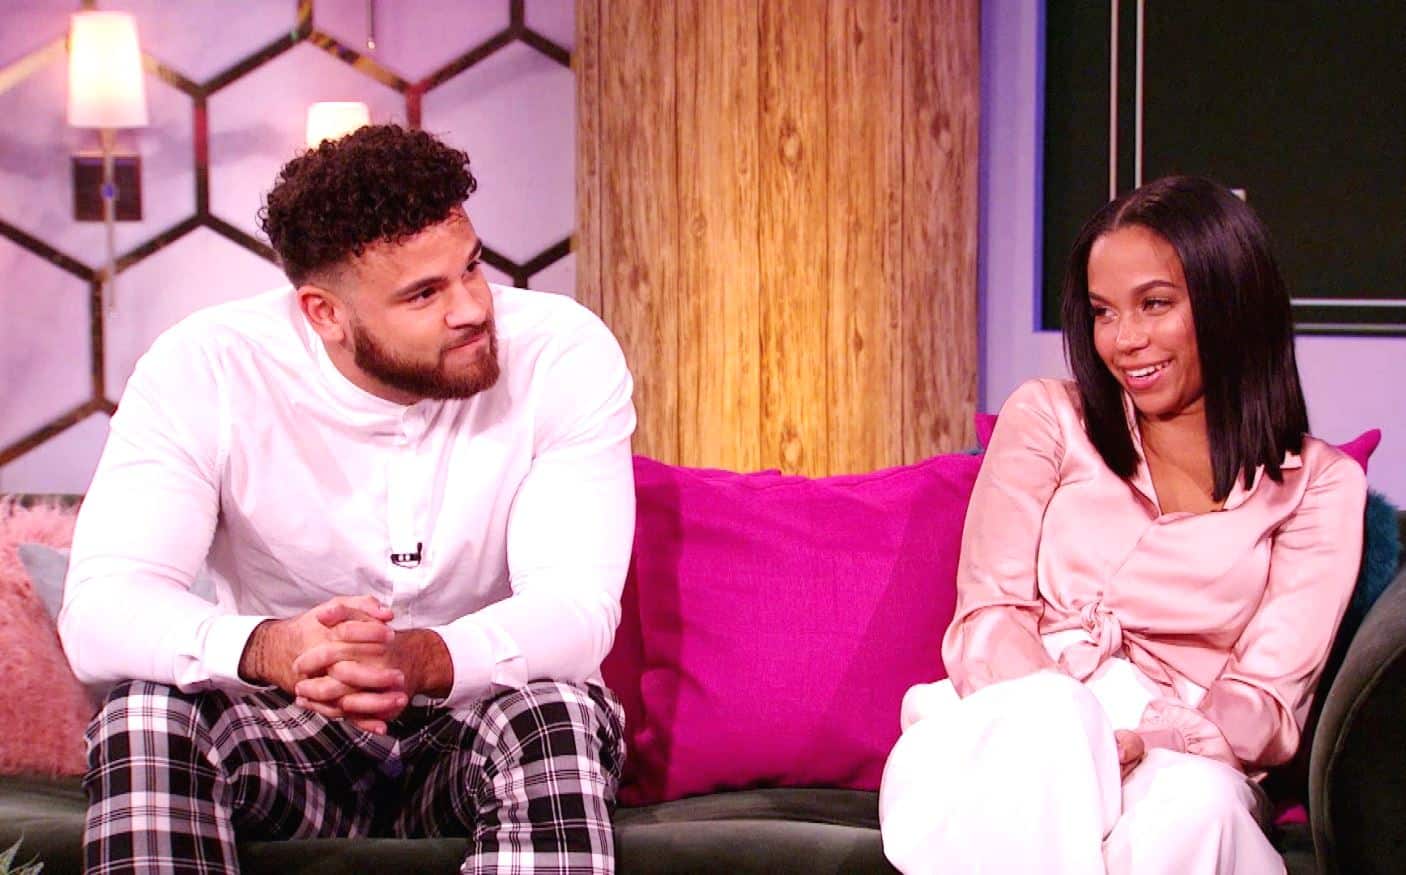 The Real Reason Teen Mom OG's Cory and Cheyenne Won't Get Back Together Is Revealed